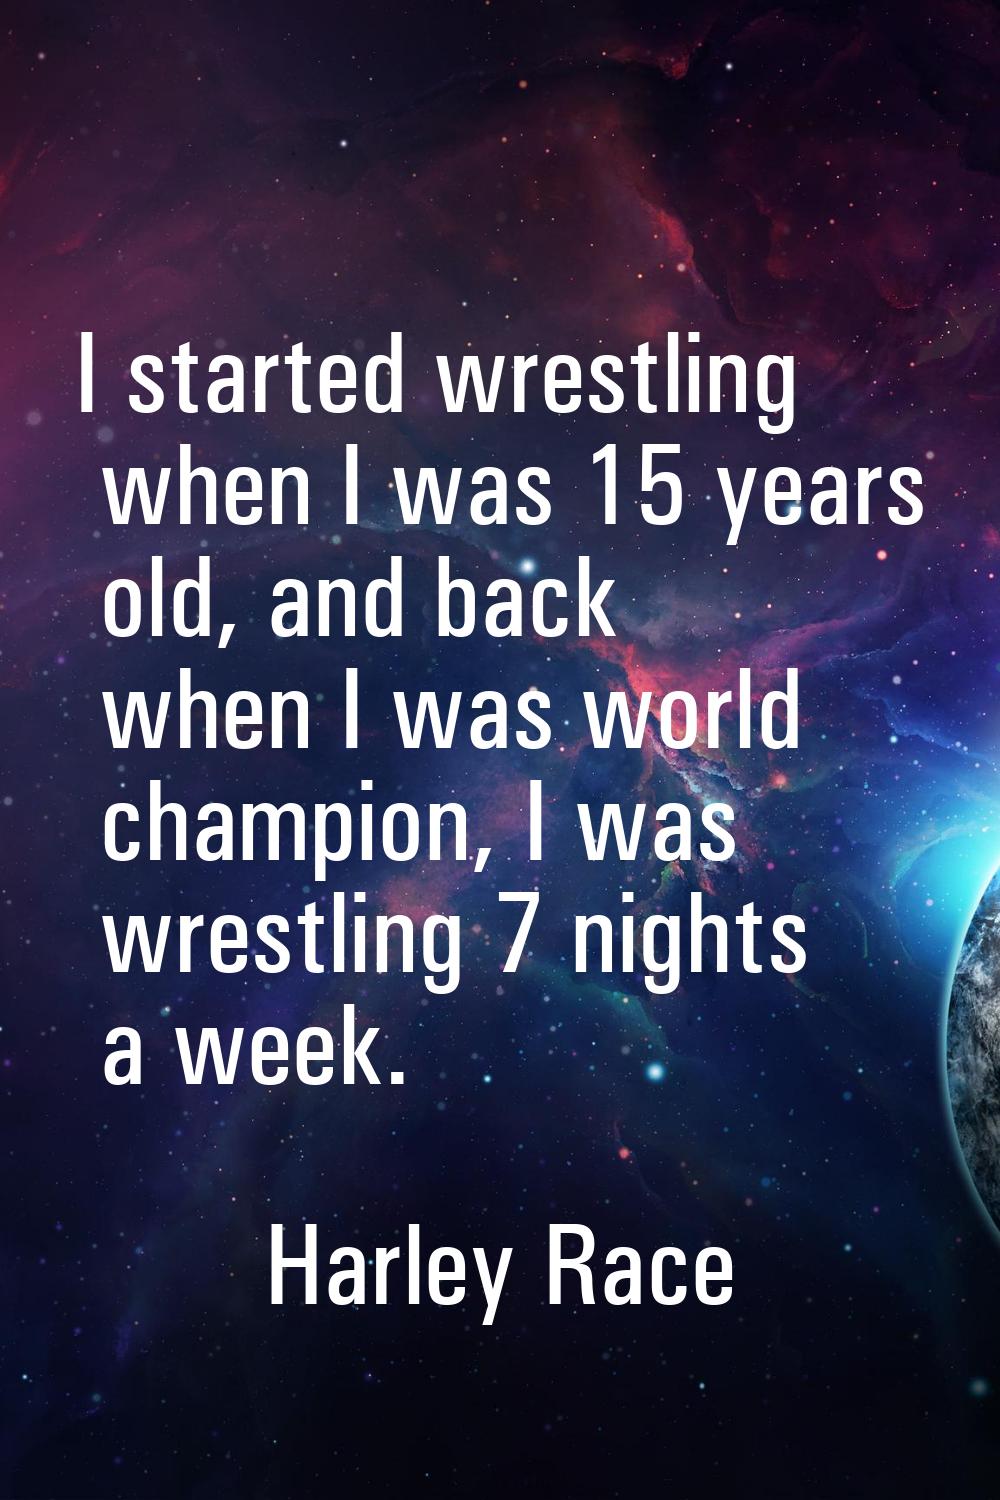 I started wrestling when I was 15 years old, and back when I was world champion, I was wrestling 7 